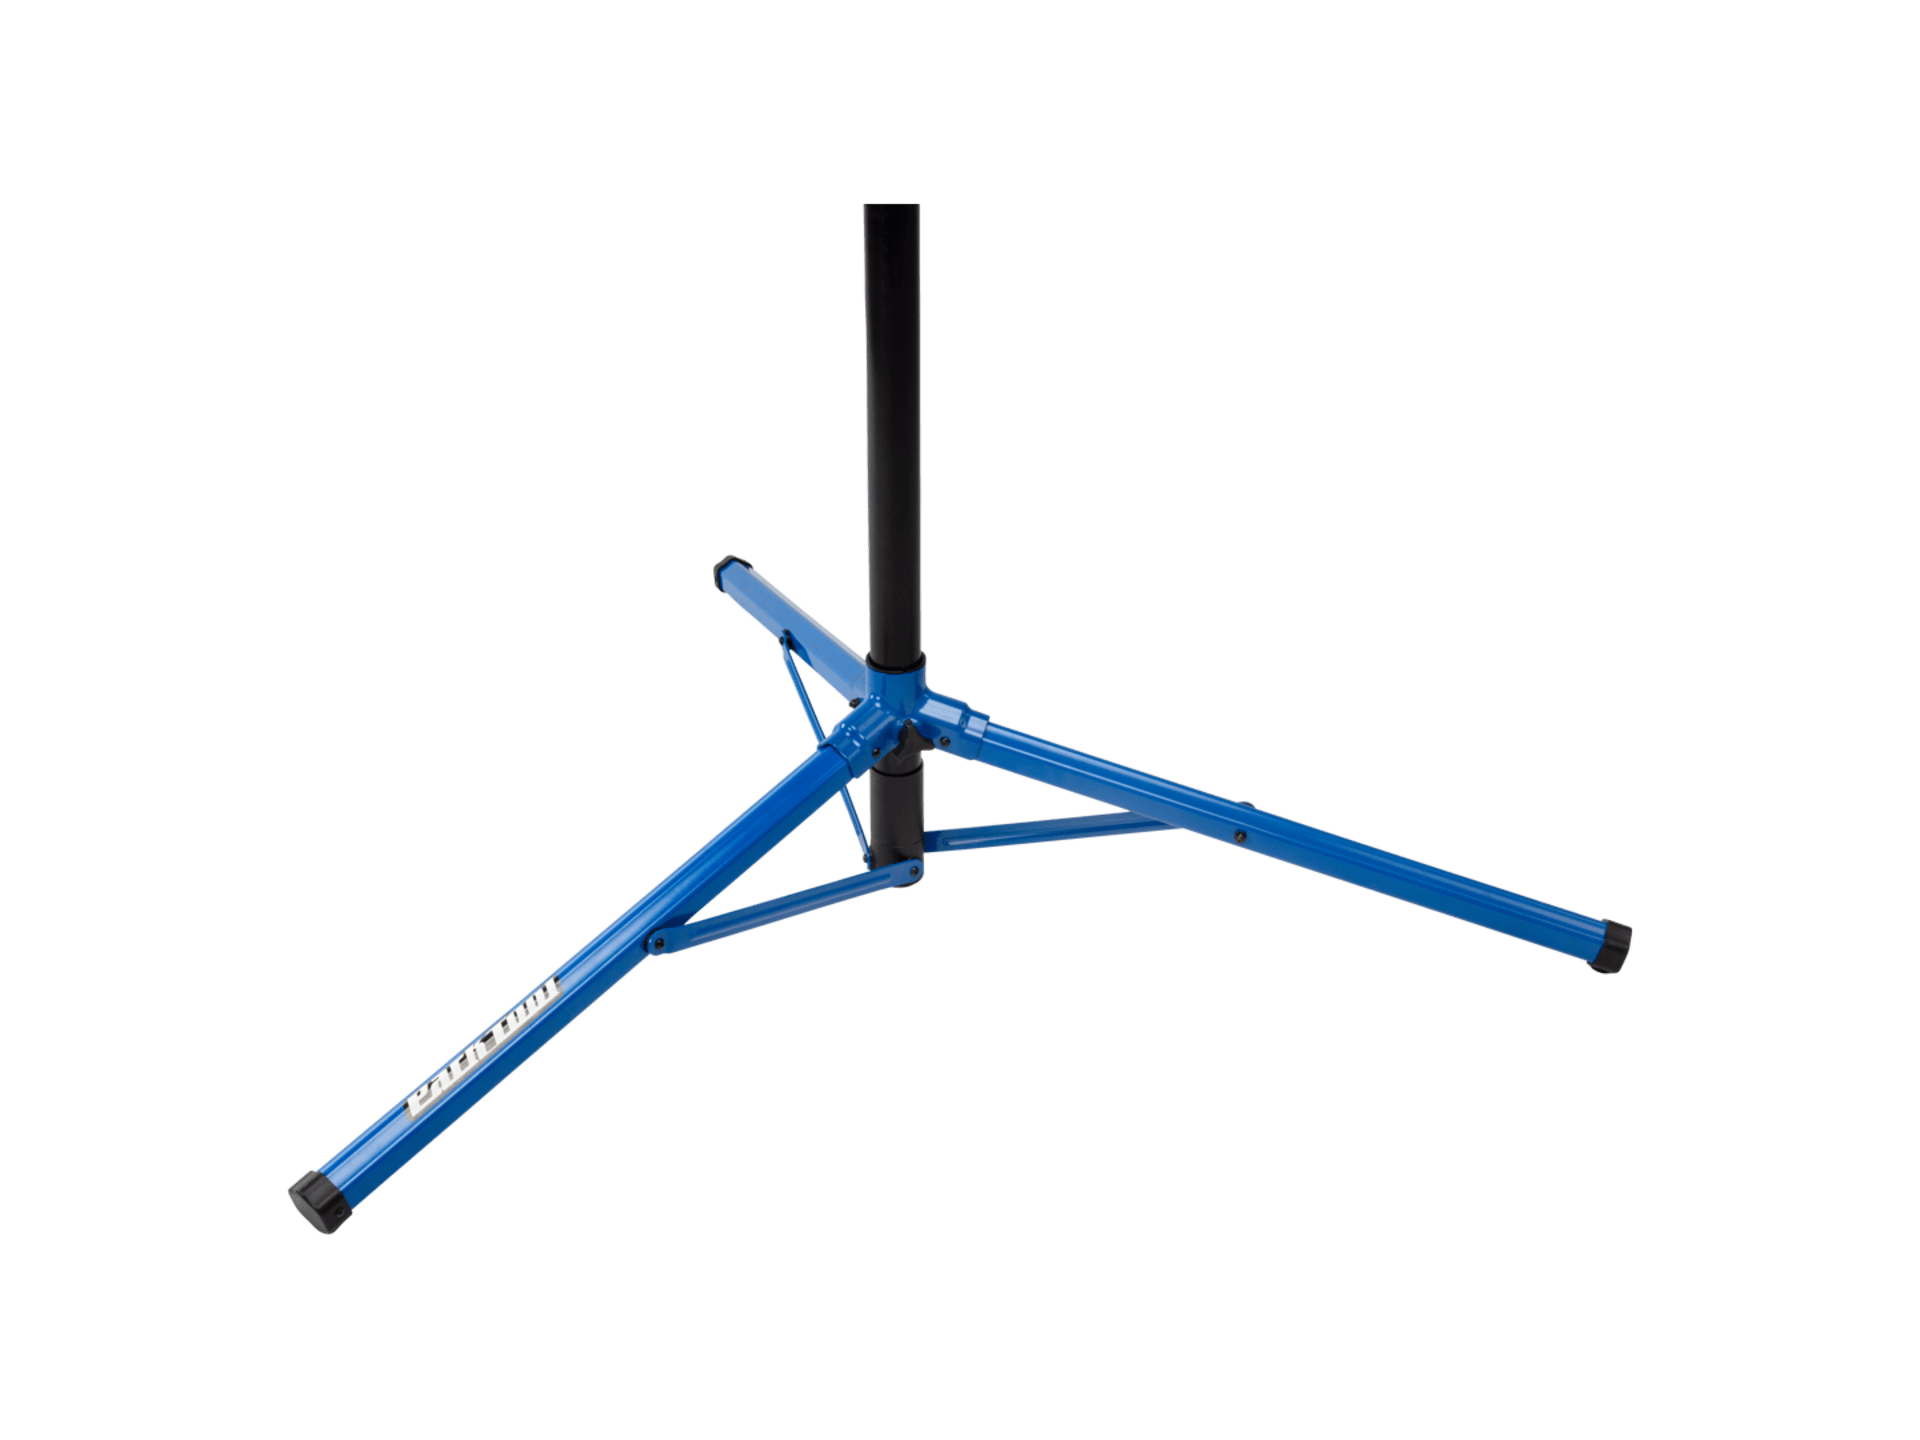 Park Tool PRS-26 Team Issue Repair Stand